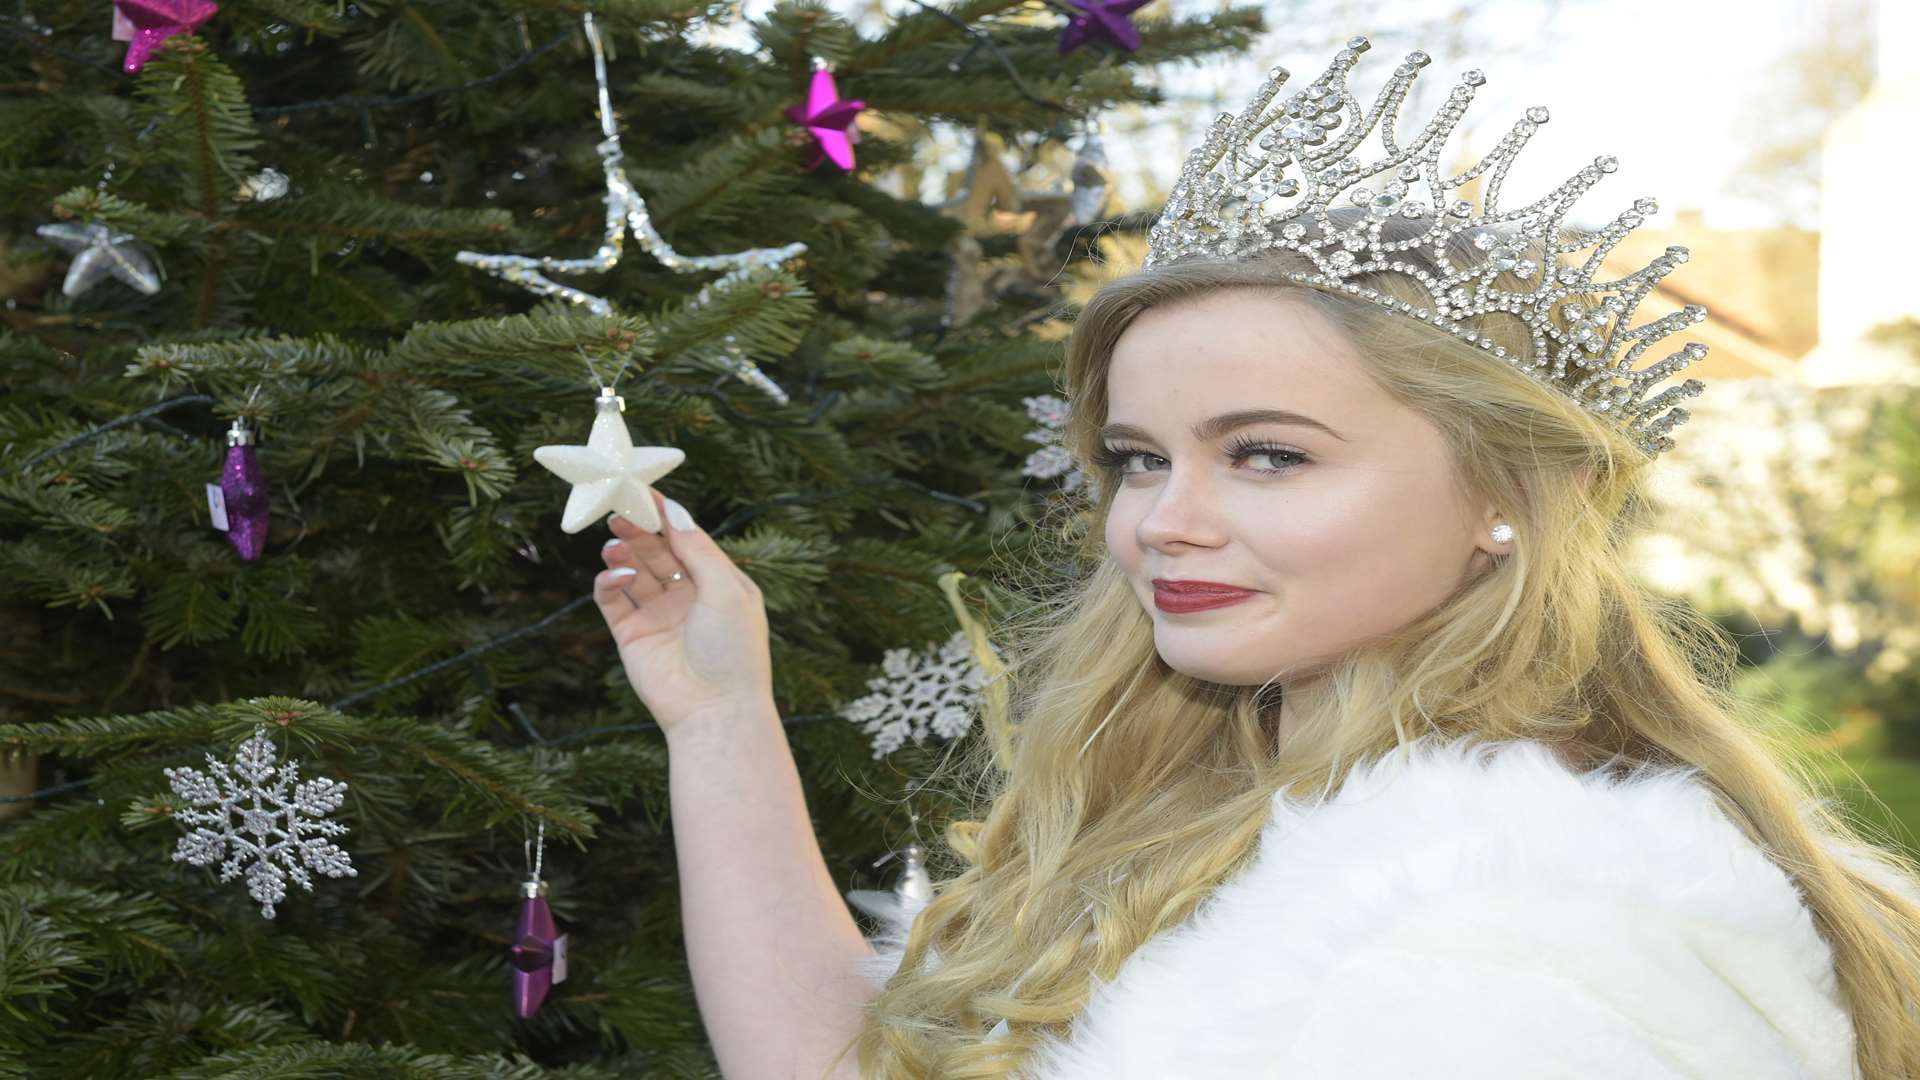 Alice Watson was a snow queen at King's Street Party last Christmas